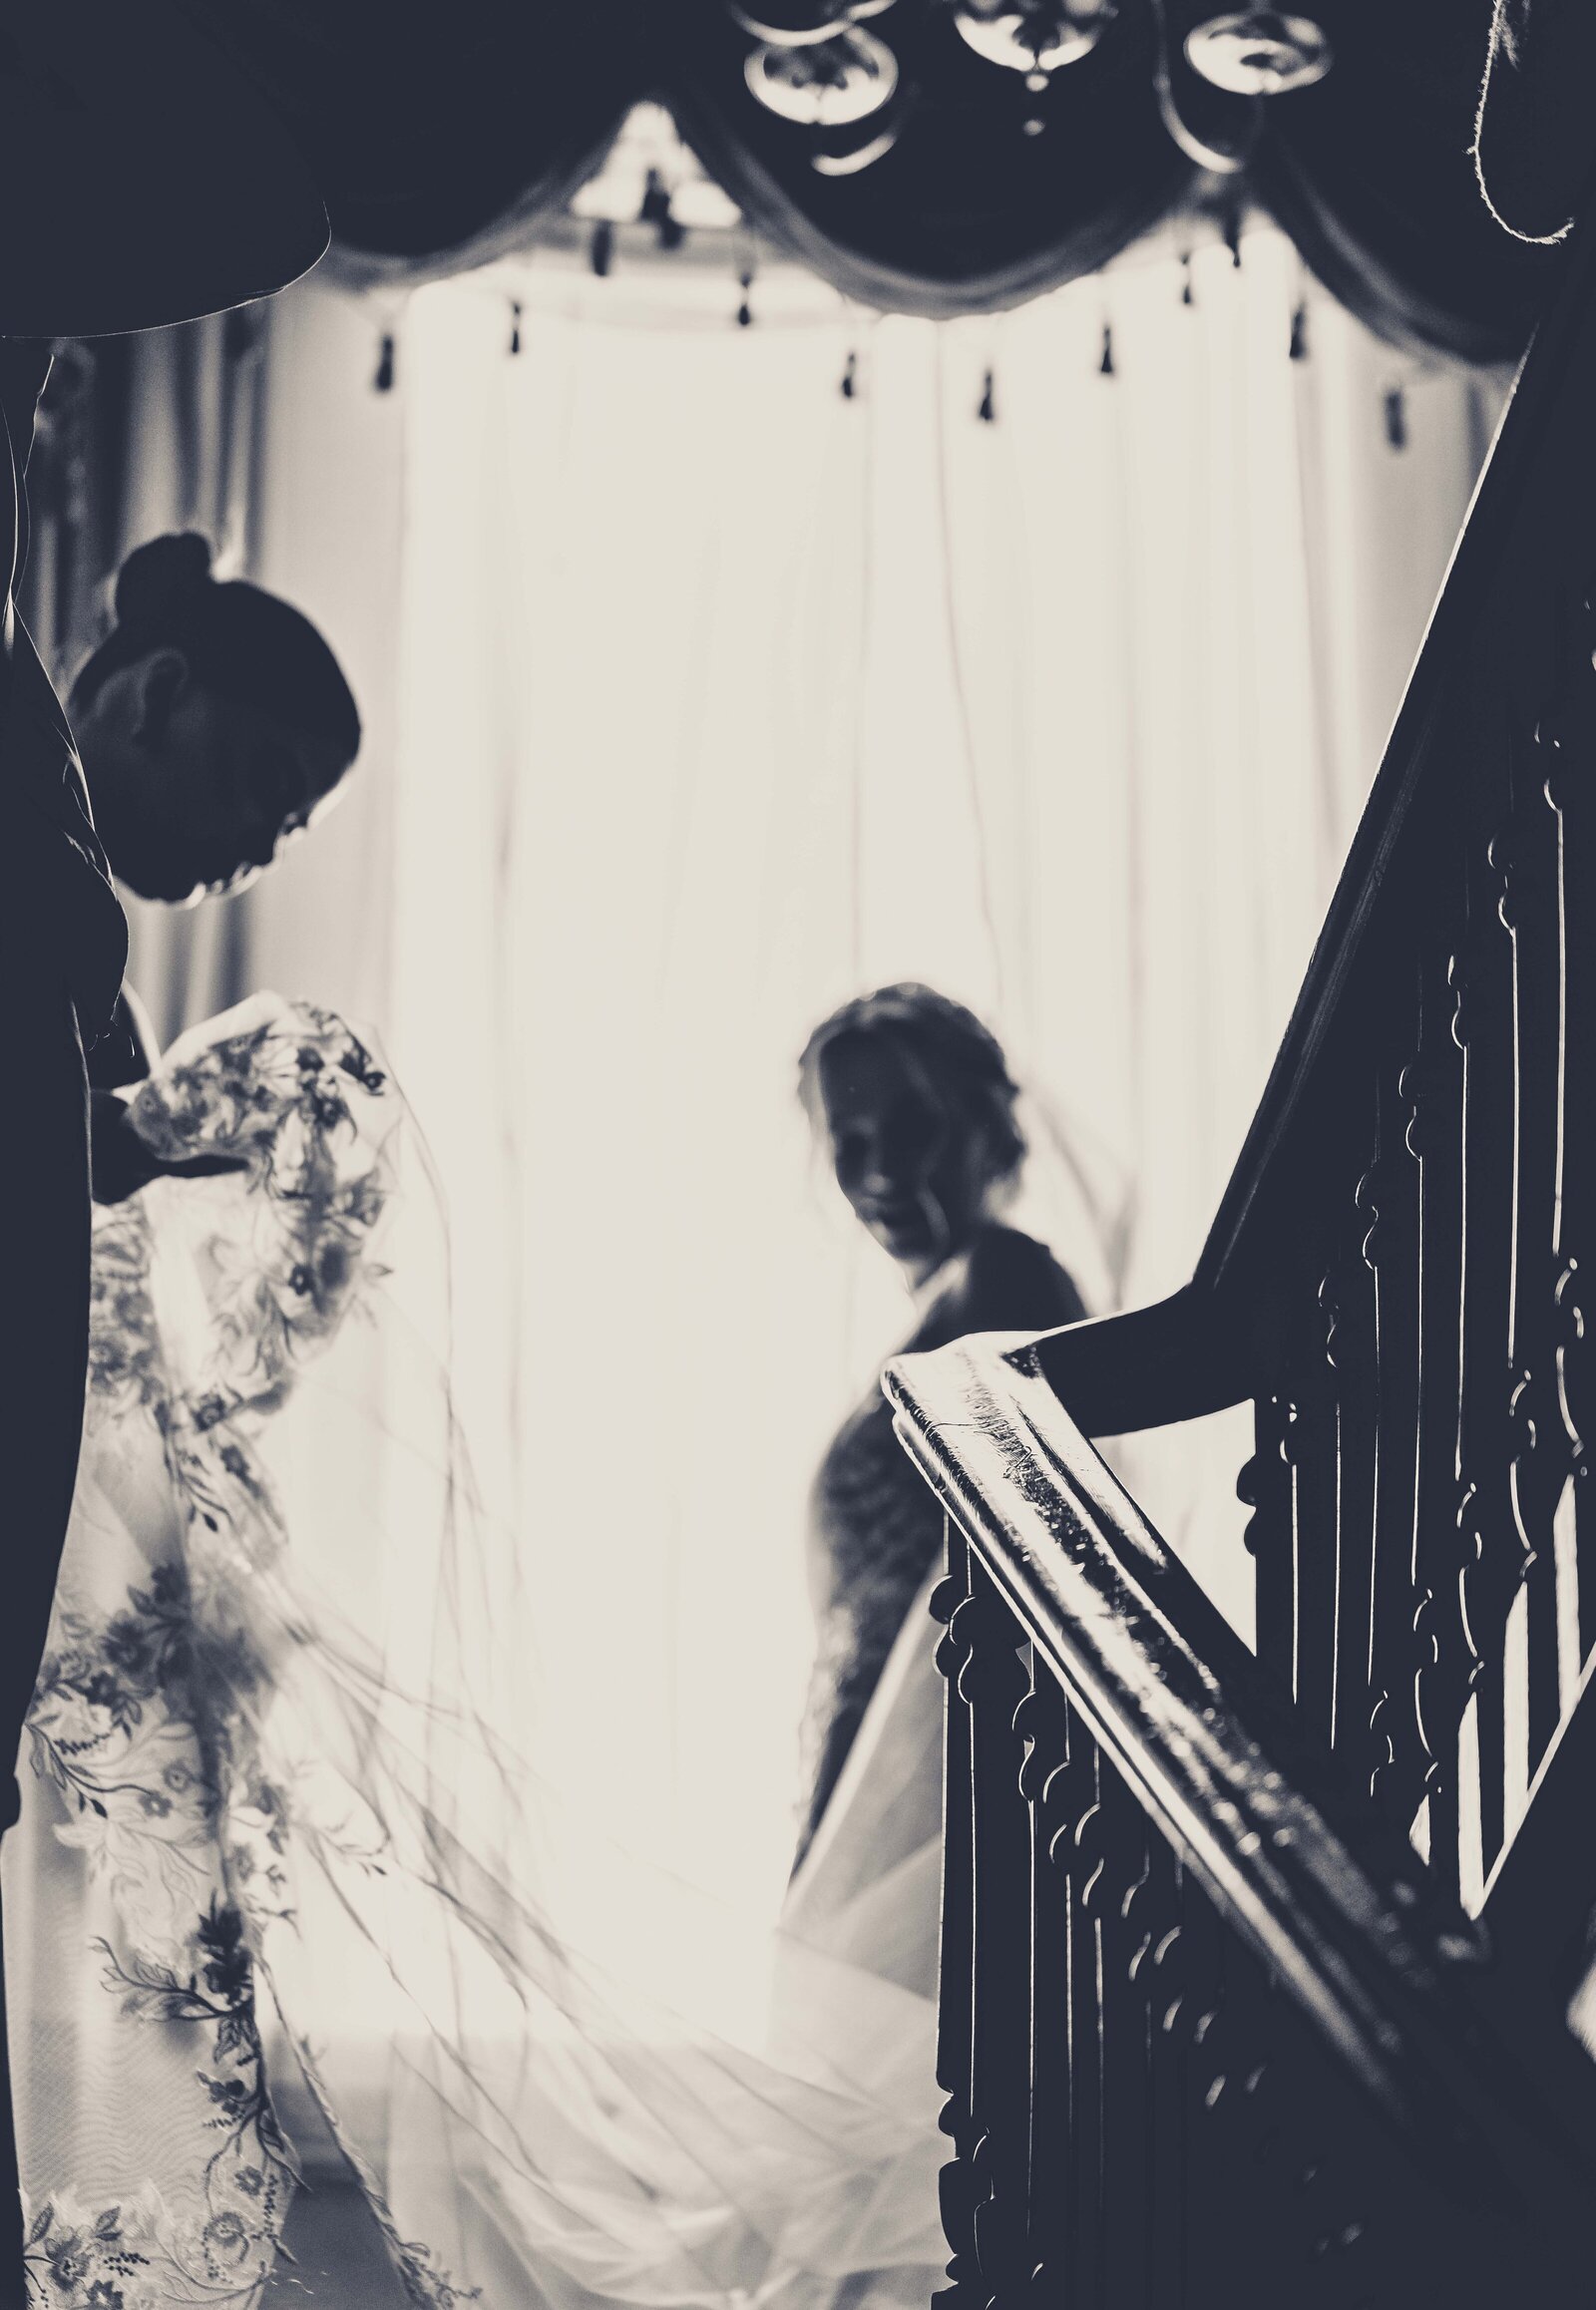 Step into the intimate and graceful moments of a bride putting on her dress at The Bell. This stunning photo captures the anticipation and beauty of her wedding day preparation, showcasing exquisite details of her gown in a charming setting. Explore our gallery for more inspiring bridal dressing moments and timeless wedding day photography.